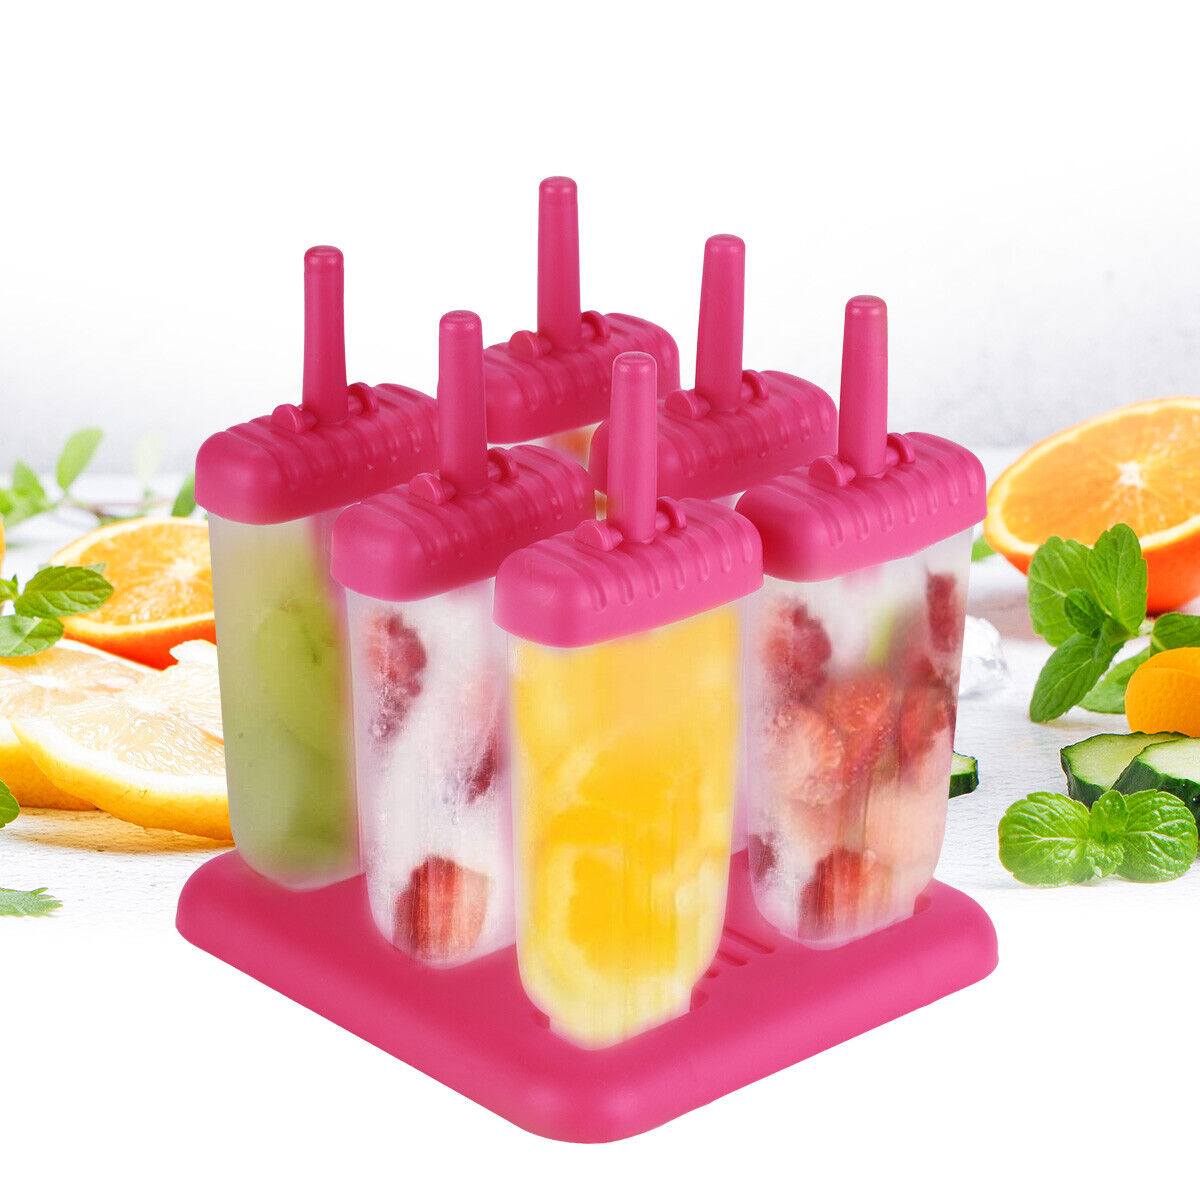 Ice Cream Maker Max 84% OFF Popsicle Mold Set with Pin Max 77% OFF and Guard Drip - Tray